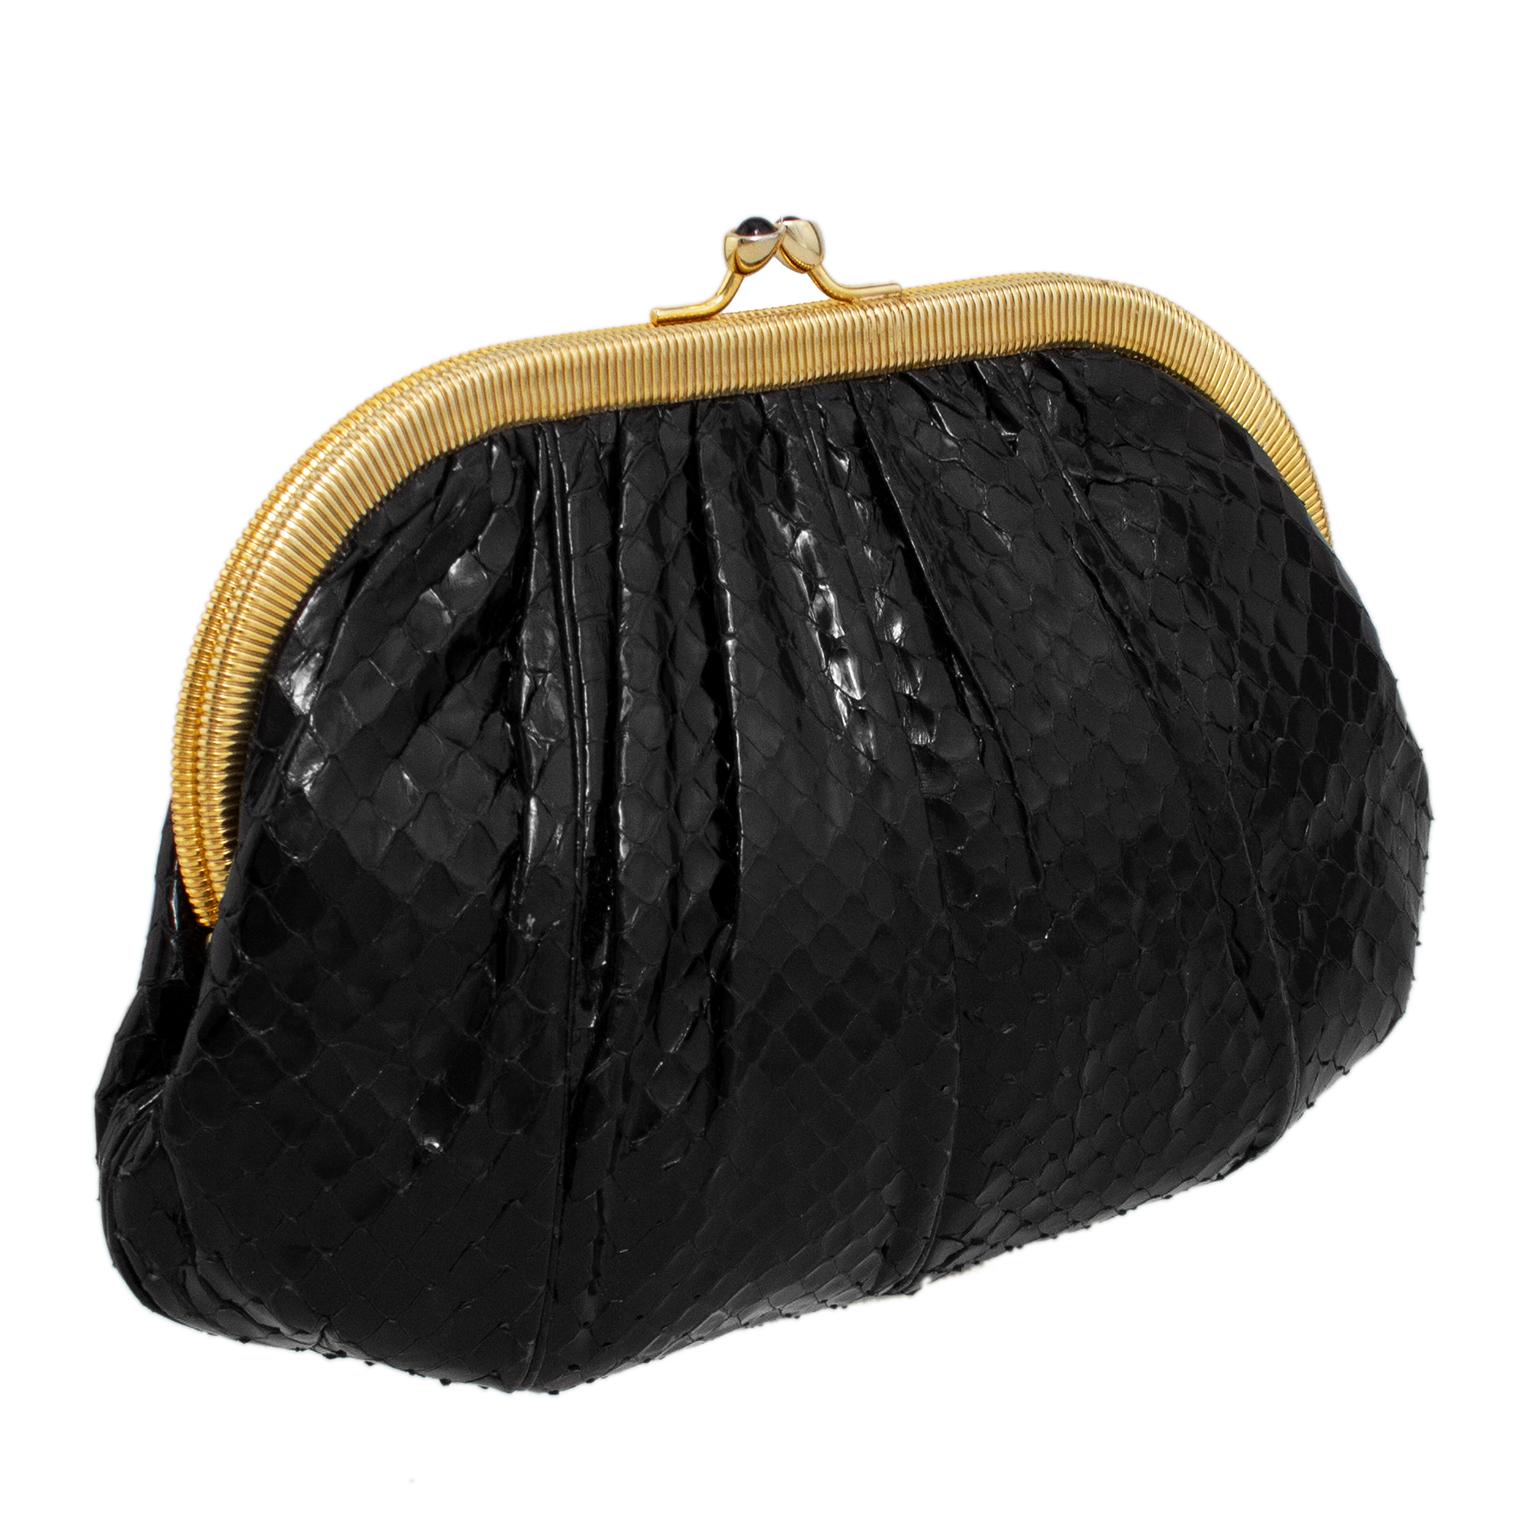 Stunning Judith Leiber evening clutch from the late 1980s. Back stamped leather with some gathering and seams that add dimension and texture. Frame style with a contrasting ribbed gold tone metal trim and kiss lock closure with small black